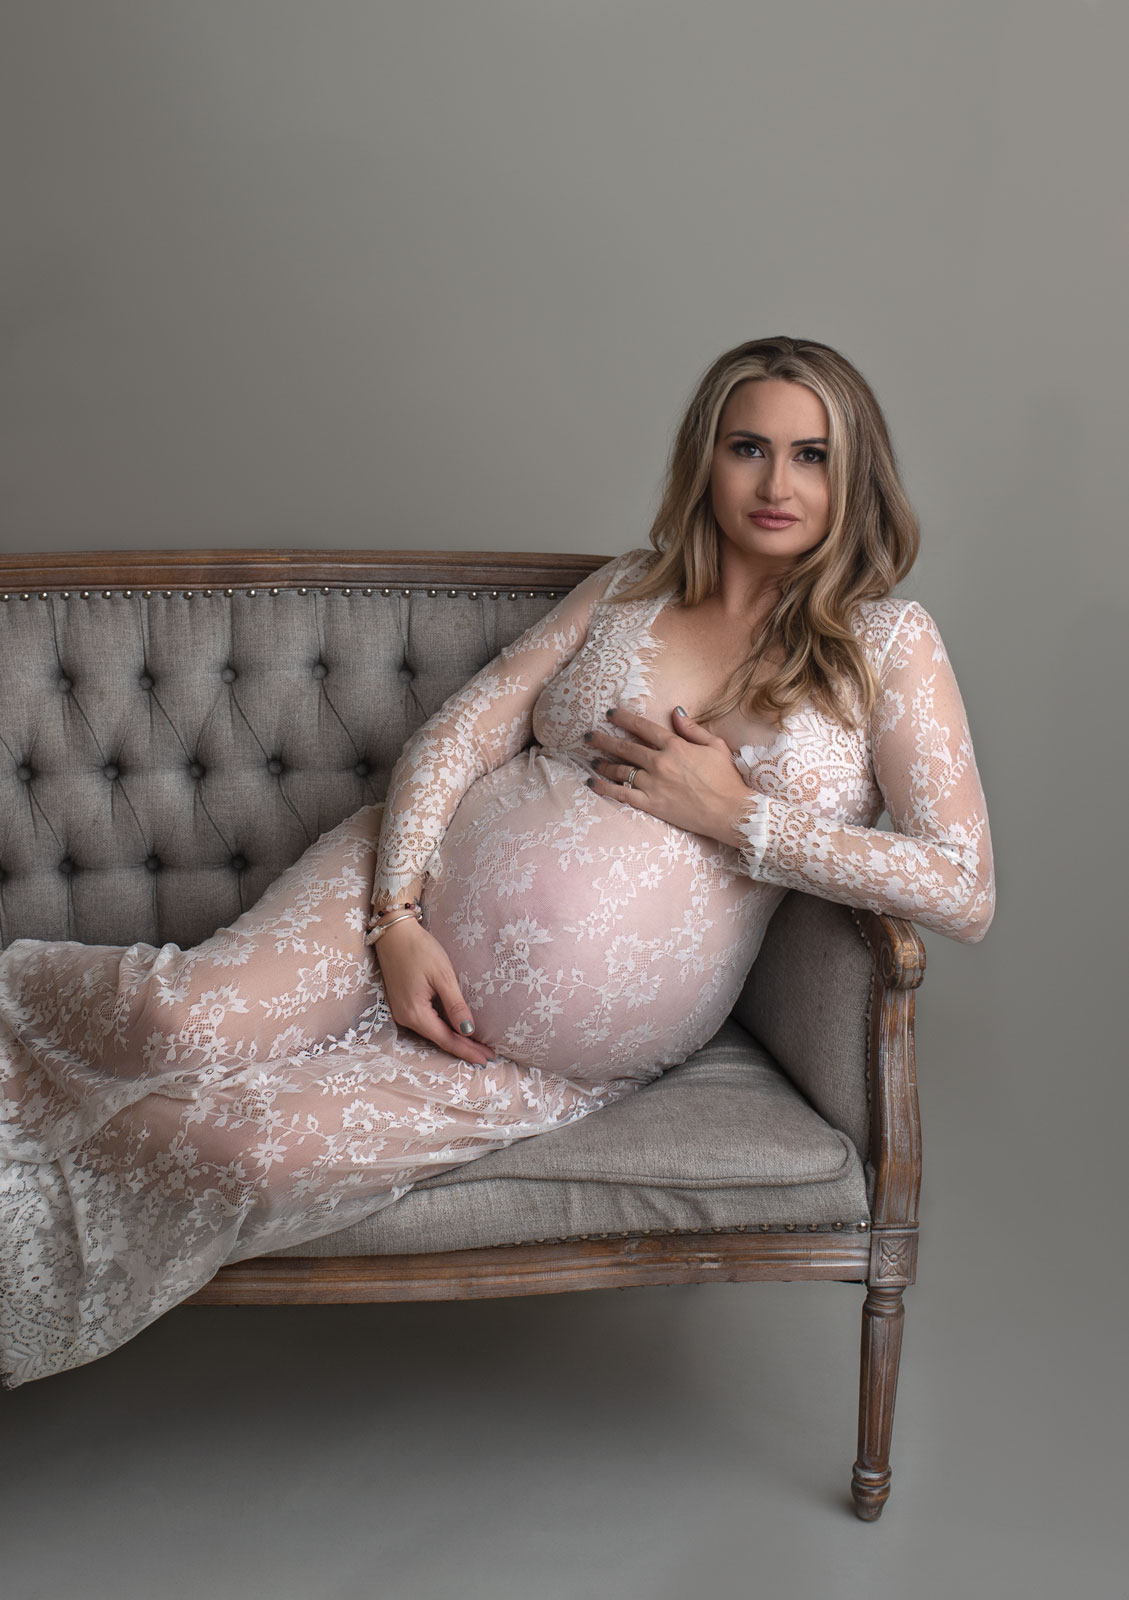 pregnant woman in lace dress posing on sofa